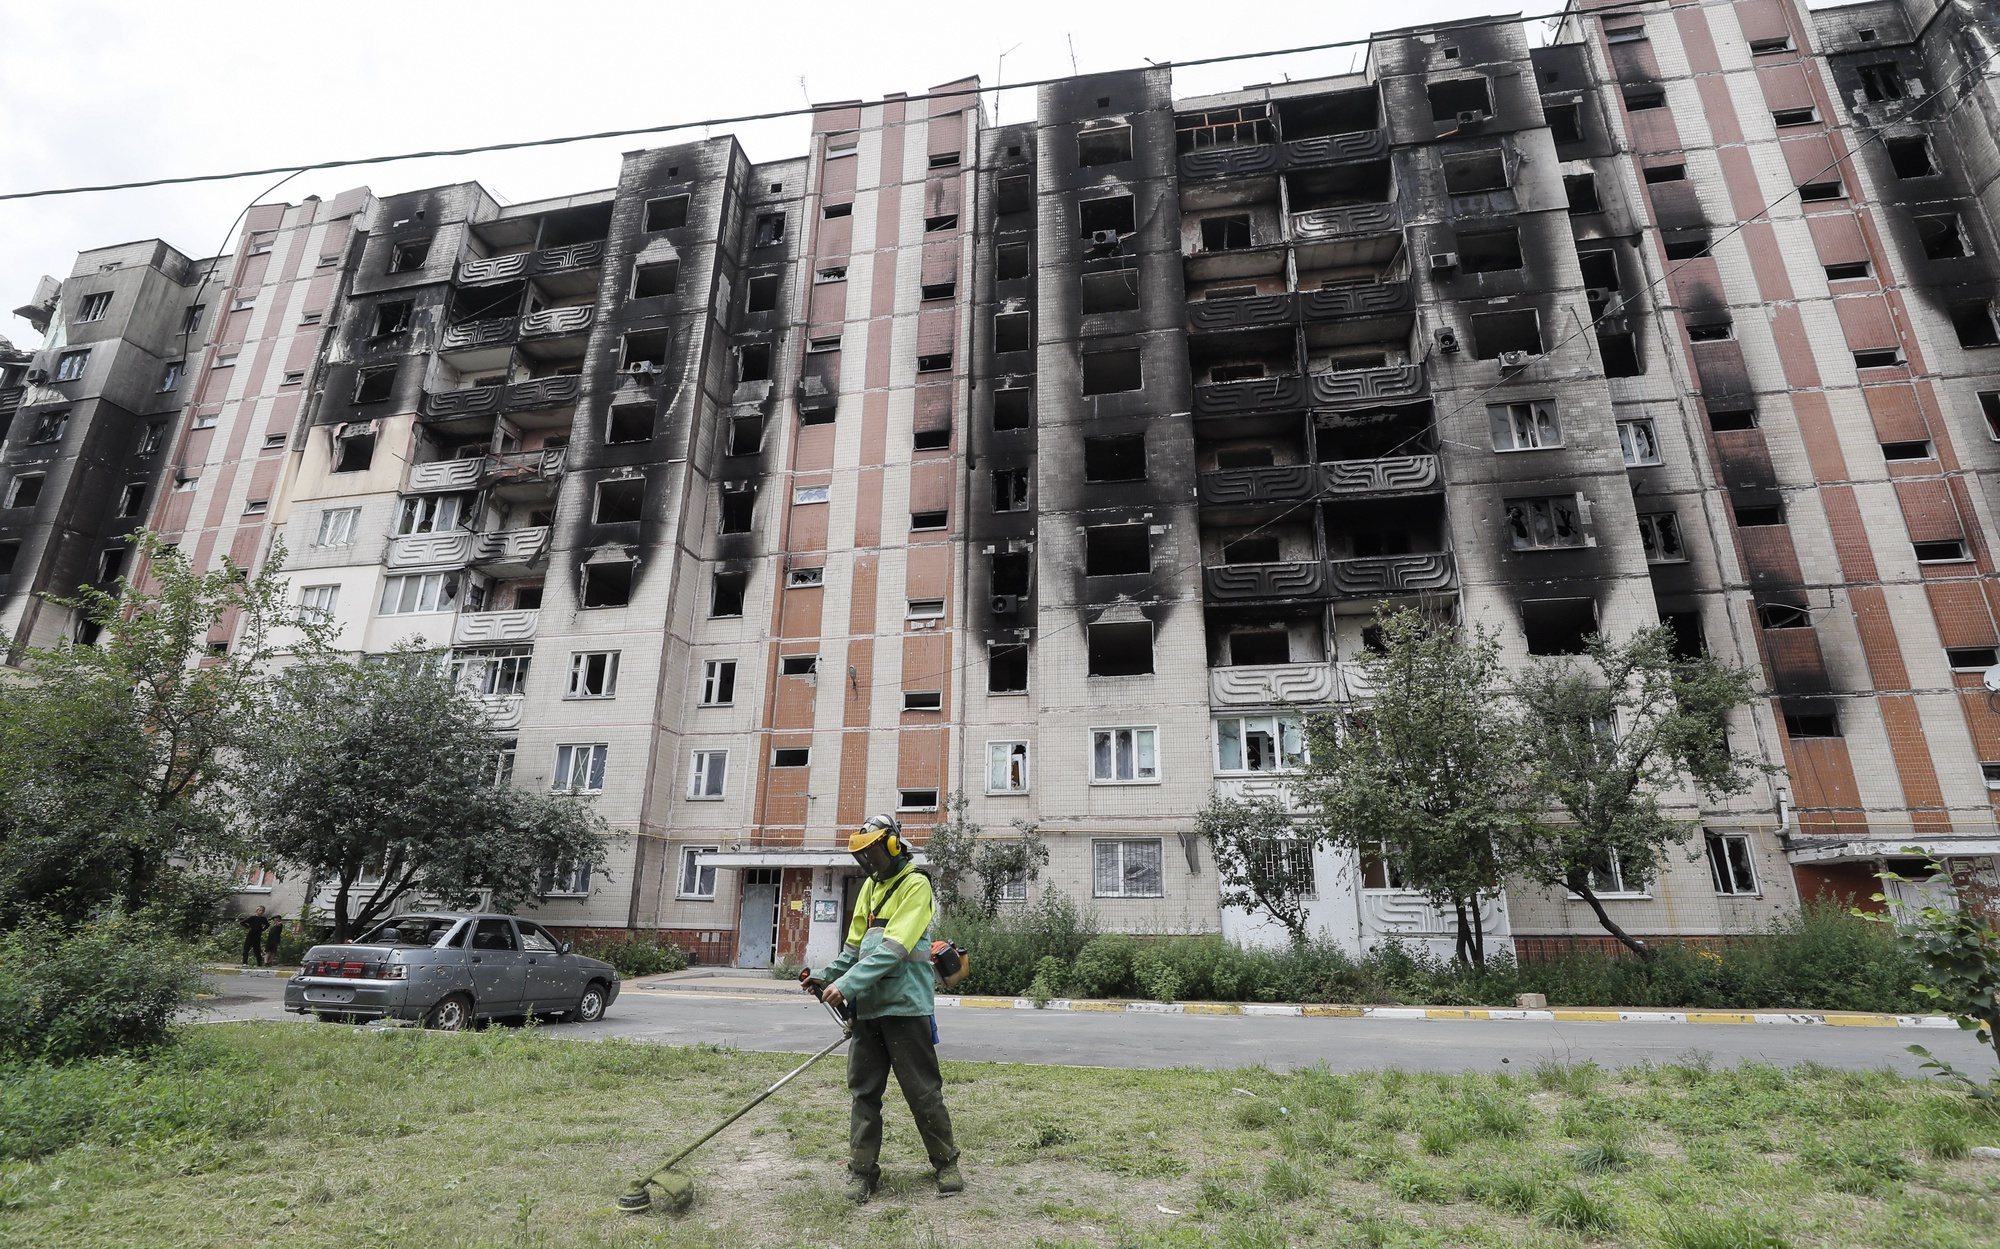 epa10112752 A communal worker mows the grass in front of a damaged residential building in the city of Irpin, near Kyiv, Ukraine, 09 August 2022 as life goes on amid Russia&#039;s military invasion of the country. Irpin as well as other towns and villages in the northern part of the Kyiv region became battlefields and were heavily shelled when Russian troops tried to reach the Ukrainian capital Kyiv in February and March 2022. Russian troops on 24 February entered Ukrainian territory, starting a conflict that has provoked destruction and a humanitarian crisis.  EPA/SERGEY DOLZHENKO